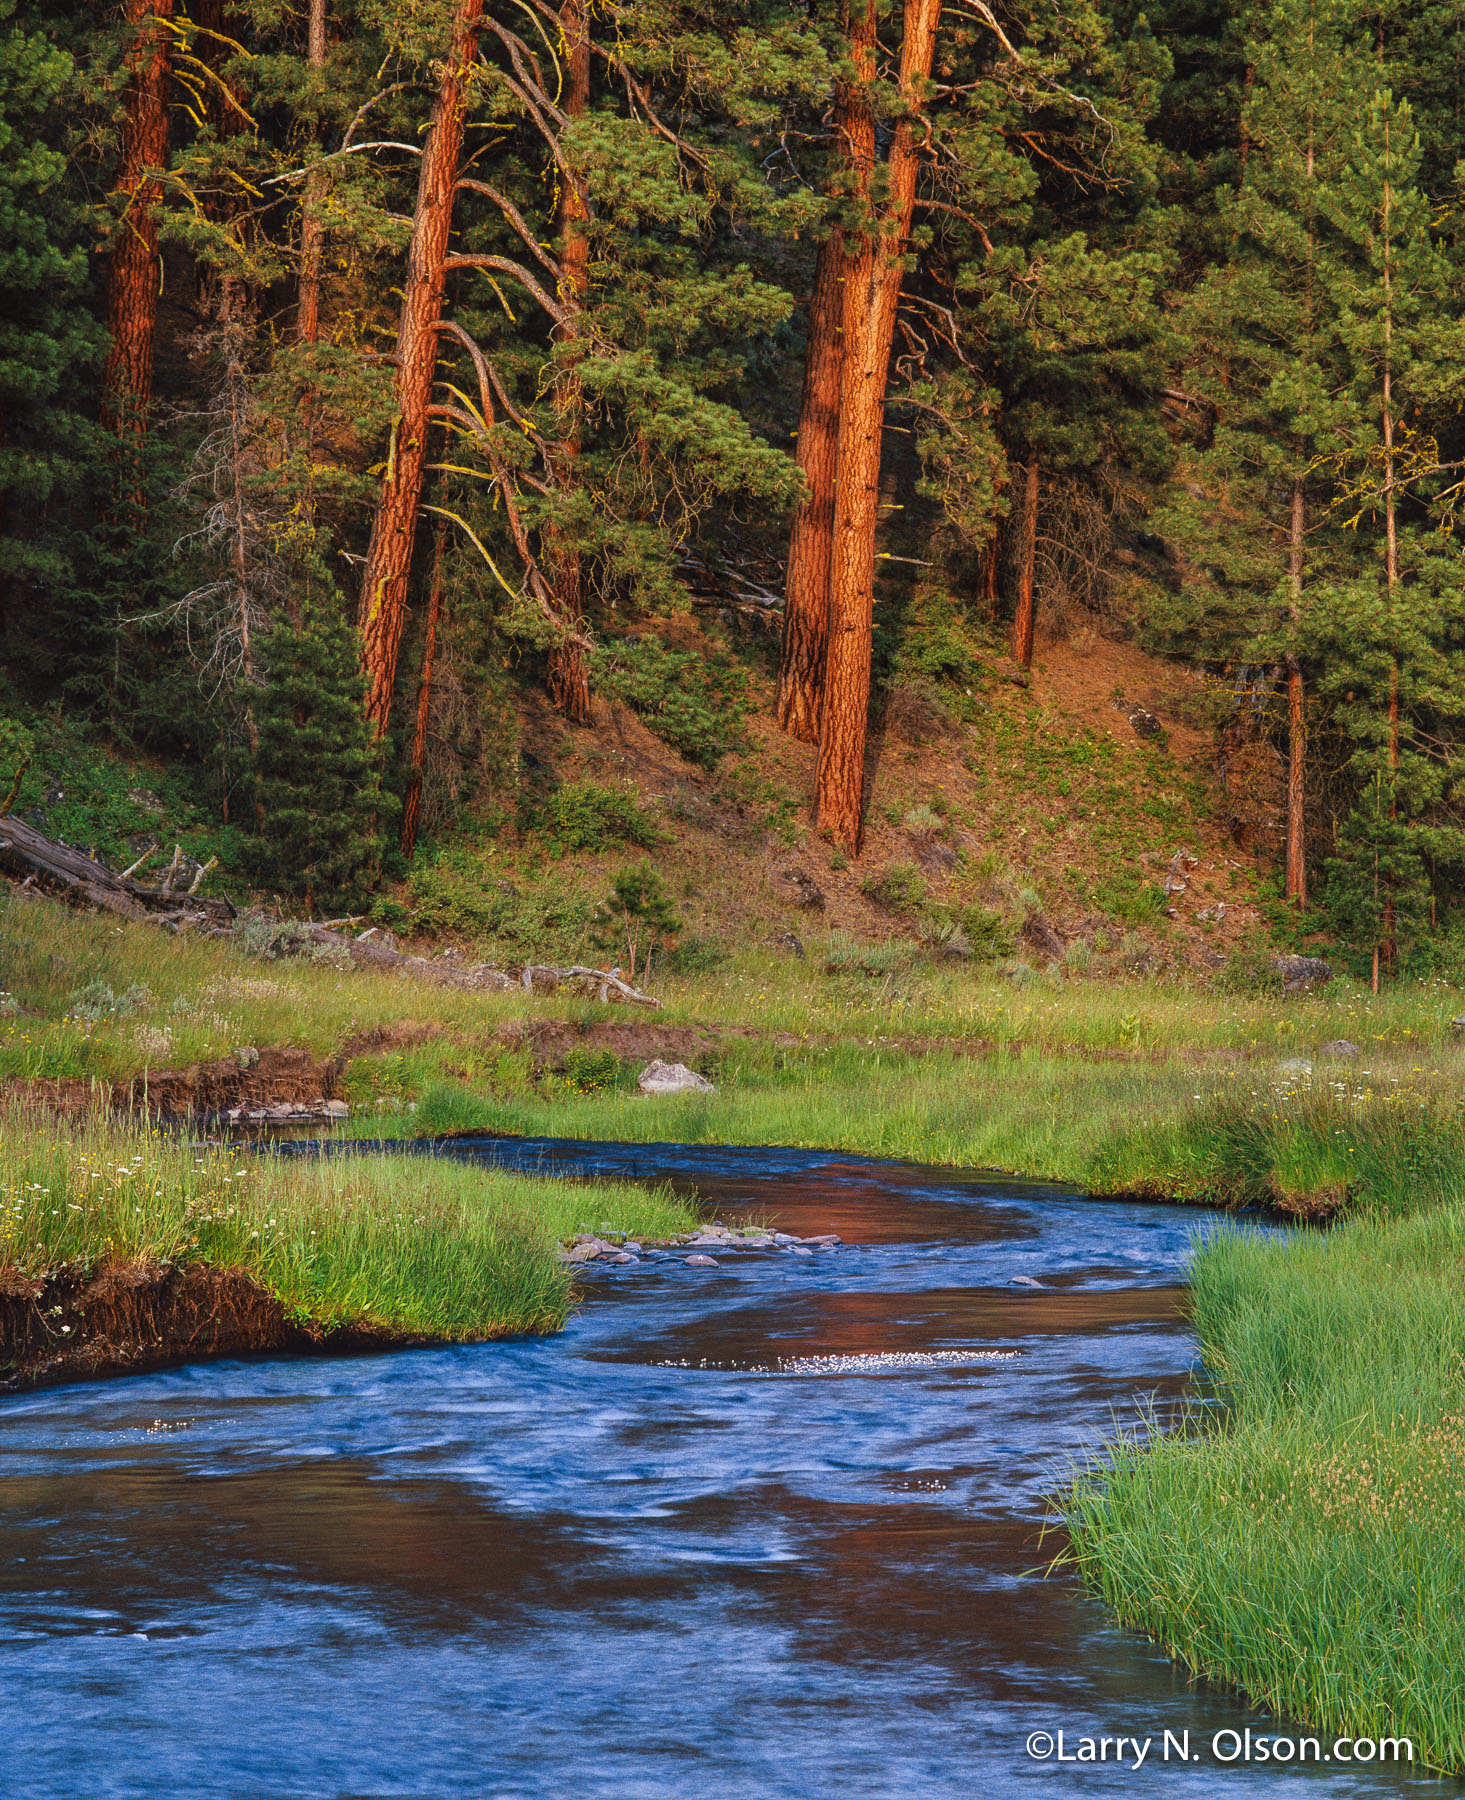 Malheur River, OR | Ponderosa Pines glow red in the late evening light along this riparian zone.